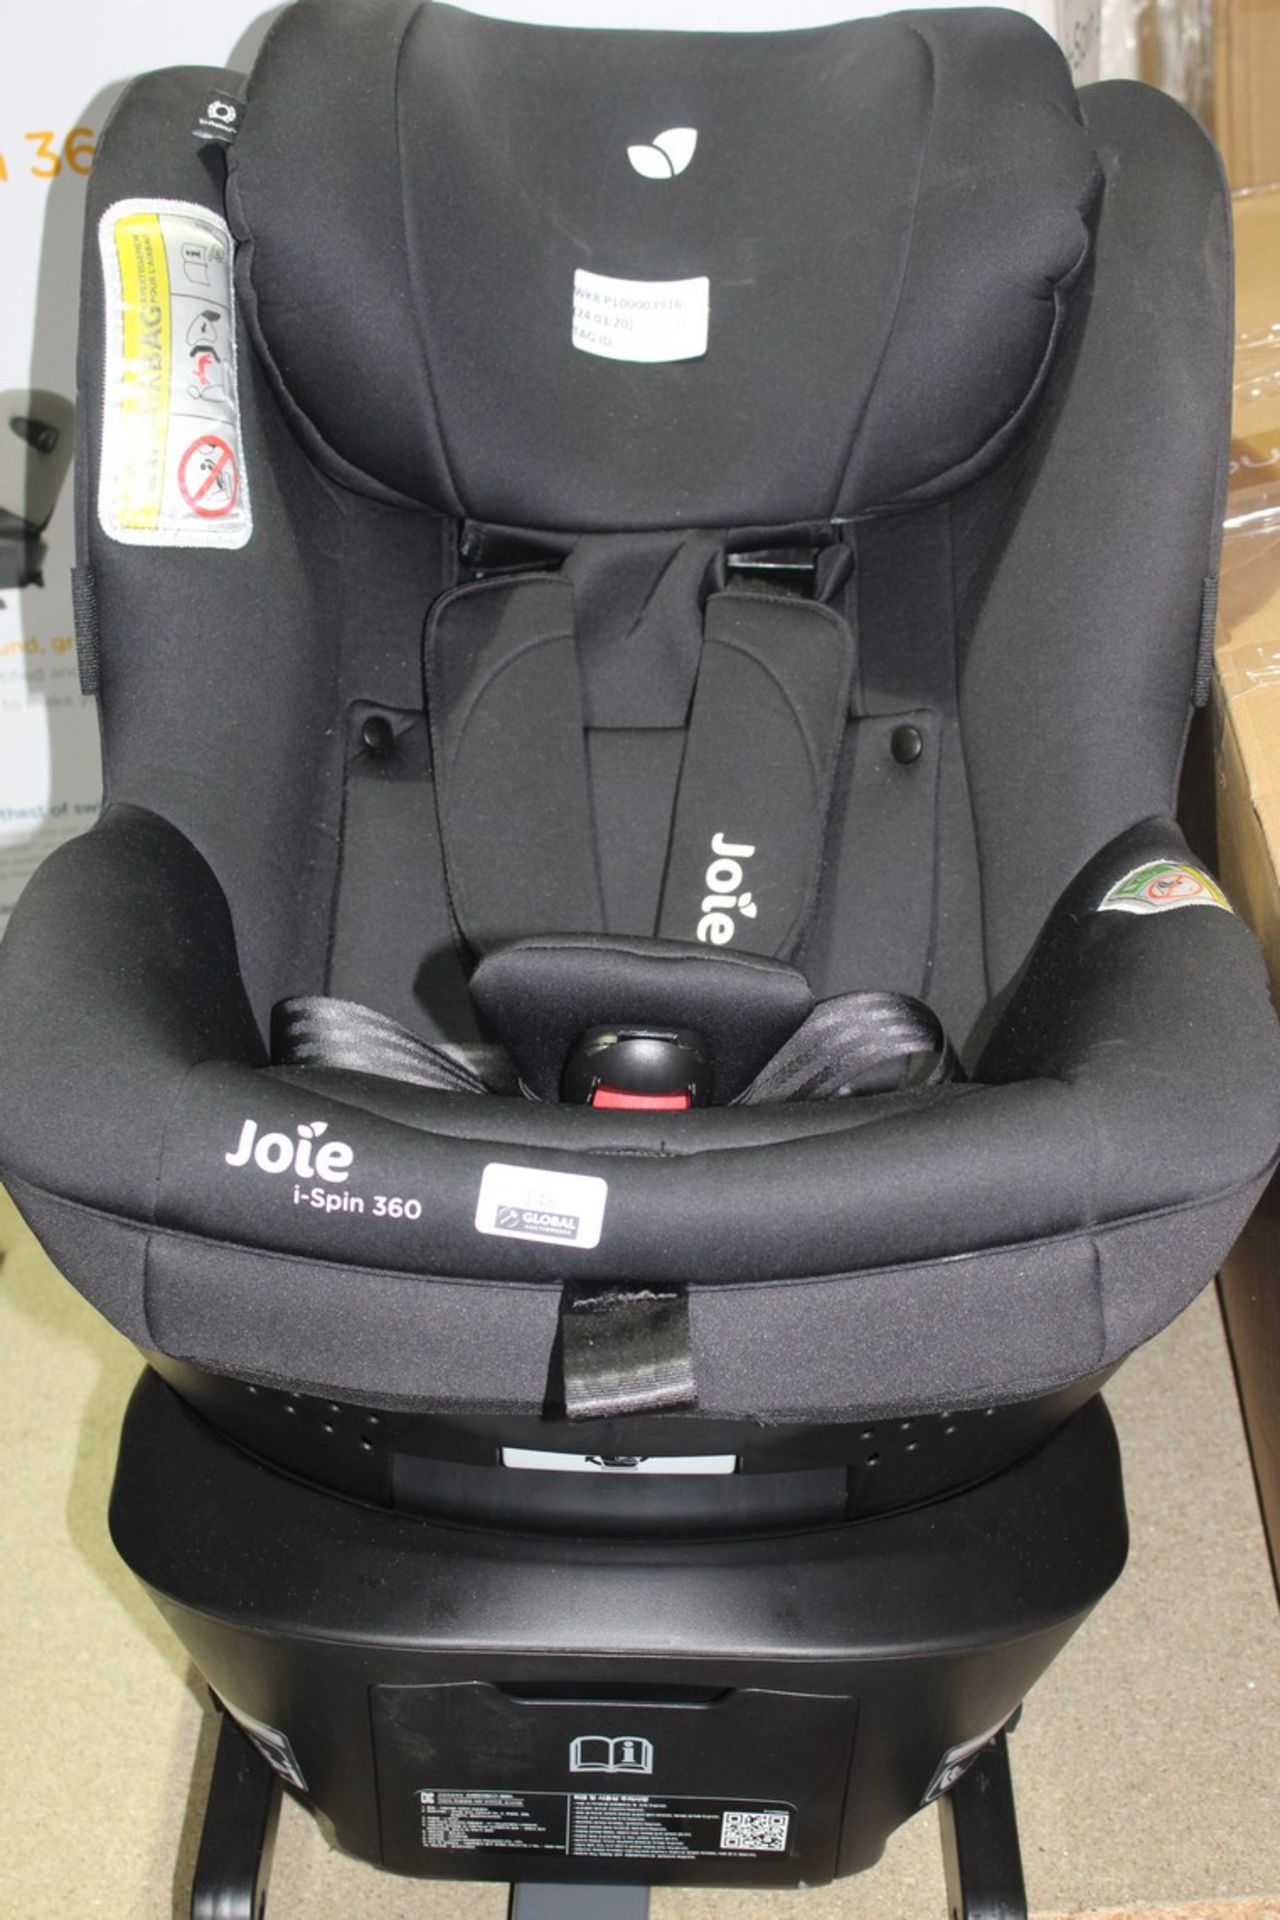 Boxed Joie In Car Kids Safety Seat RRP £280 (59308)  (Appraisals Available Upon Request)